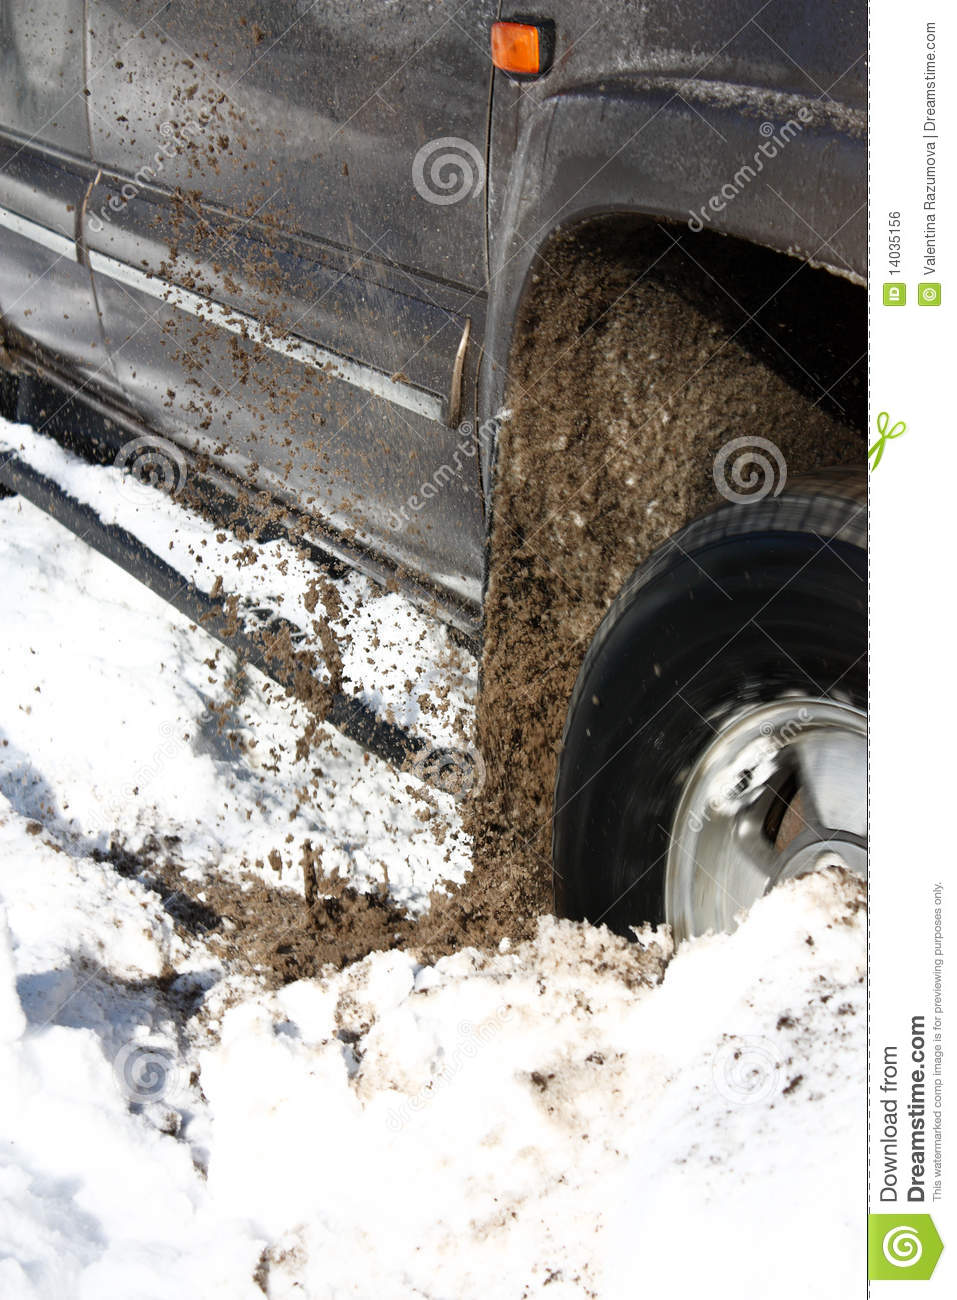 Jeep Tire In A Mud Hole  Royalty Free Stock Image   Image  14035156